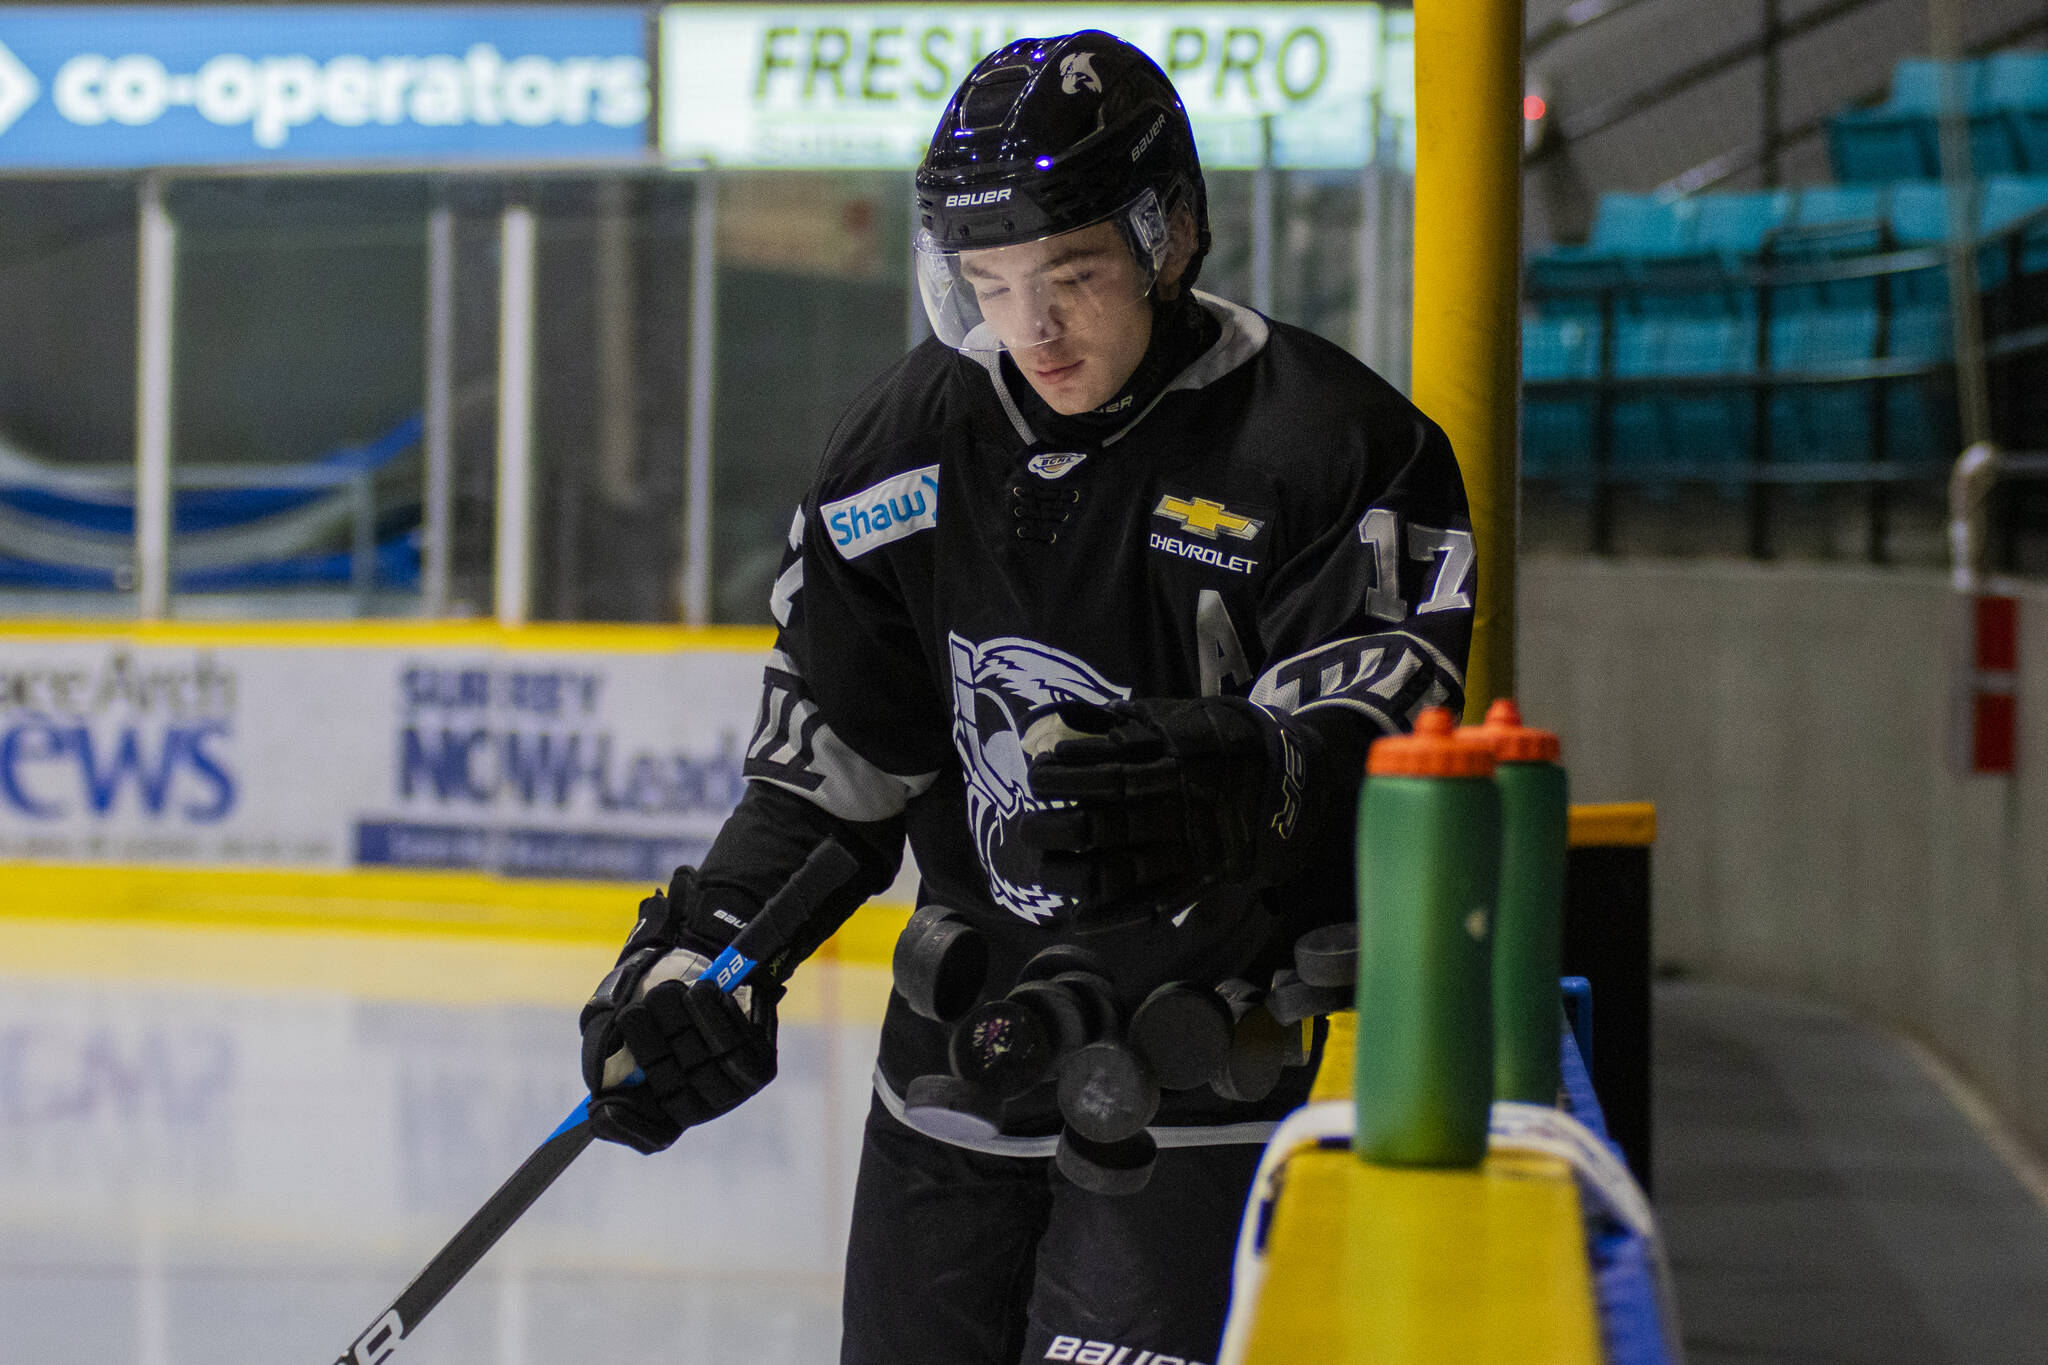 Surrey Eagles centre (and scholarship winner) Zachary Wagnon at a recent game. Neck guards are now mandatory – based on availability of the protective neckwear – in the British Columbia Hockey League, in the wake of the death of a former NHLer in England. (Tav Morrison Media photo)